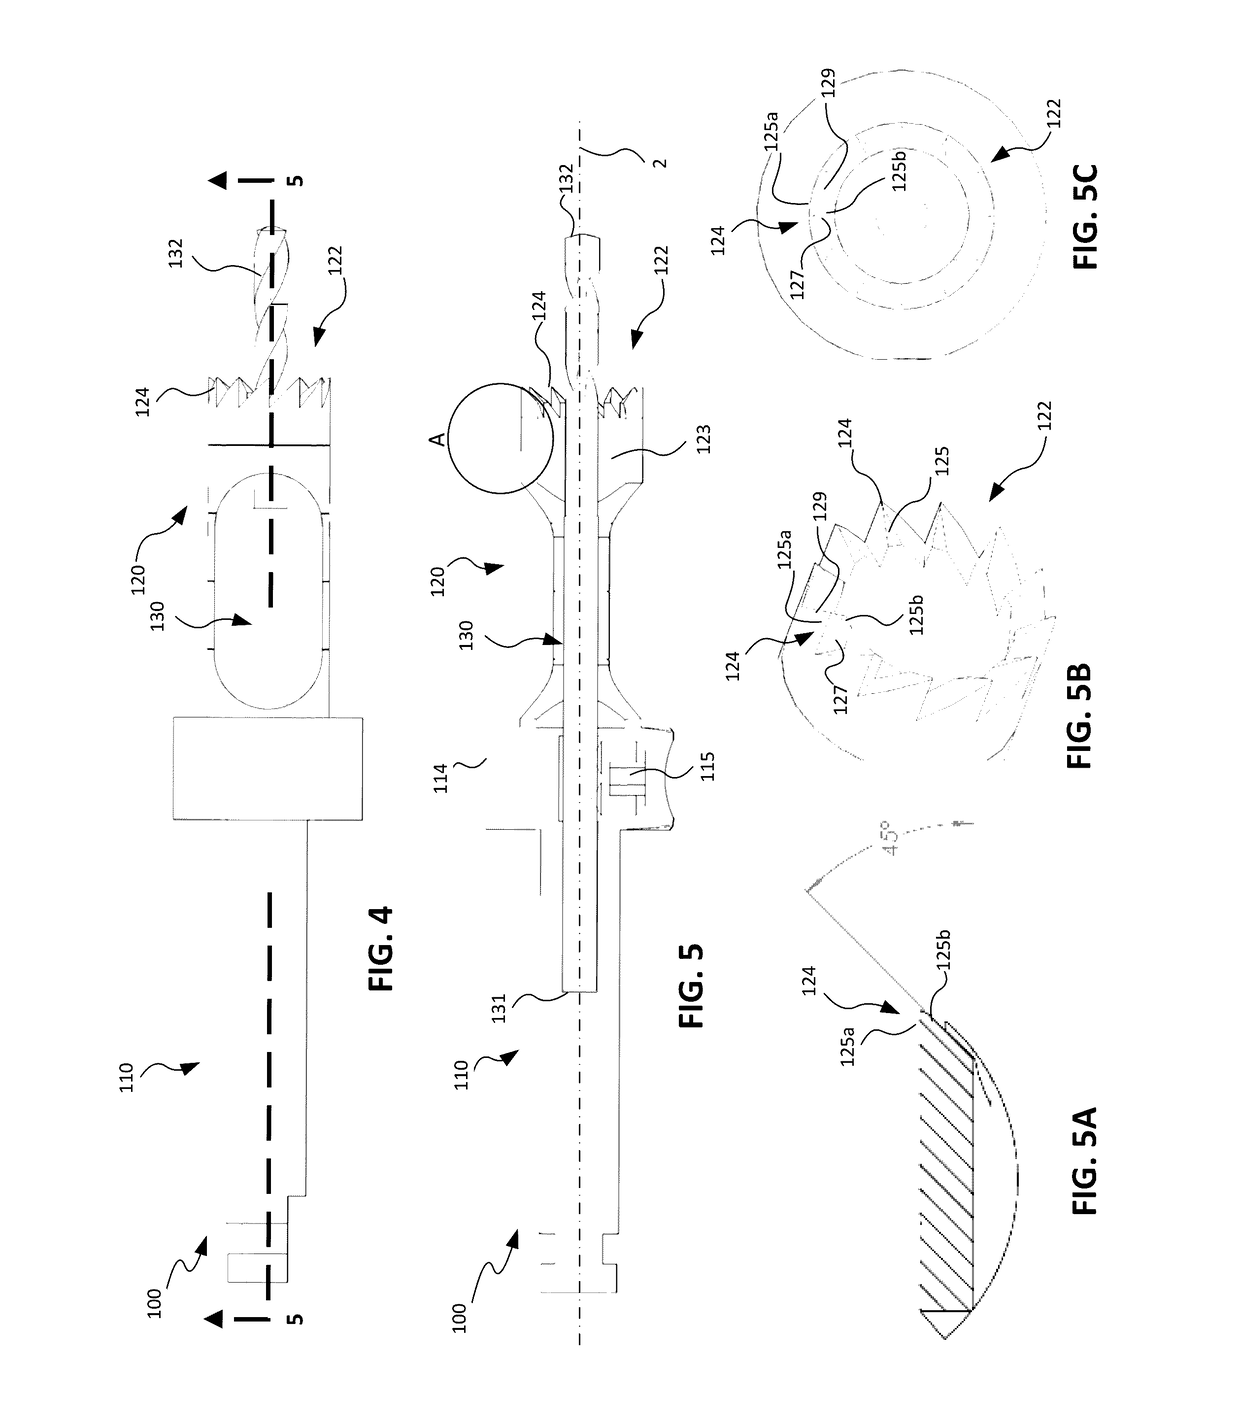 Implant placement trephine, prepackaged and sized implant / trephine kit, and methods of use